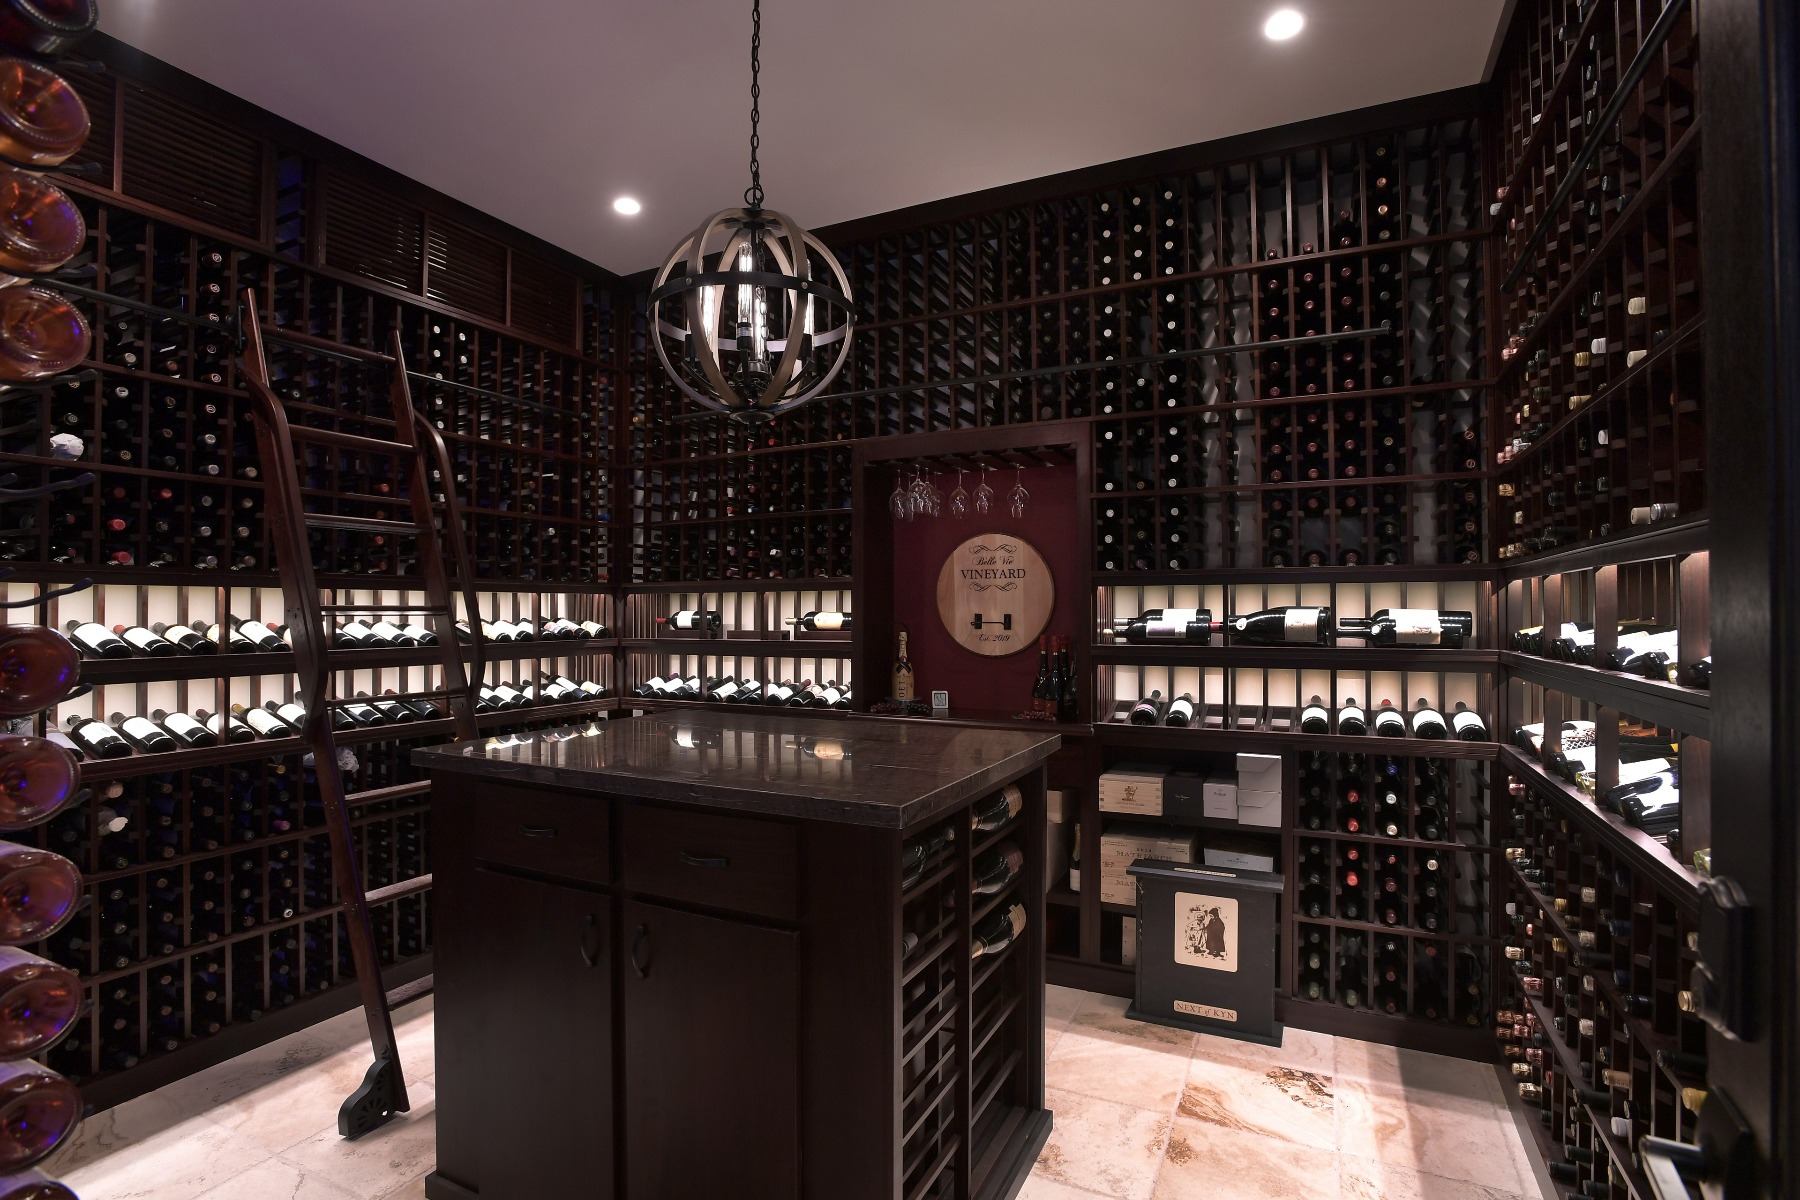 An island in the middle of the room acts as a great spot to open and decant wines